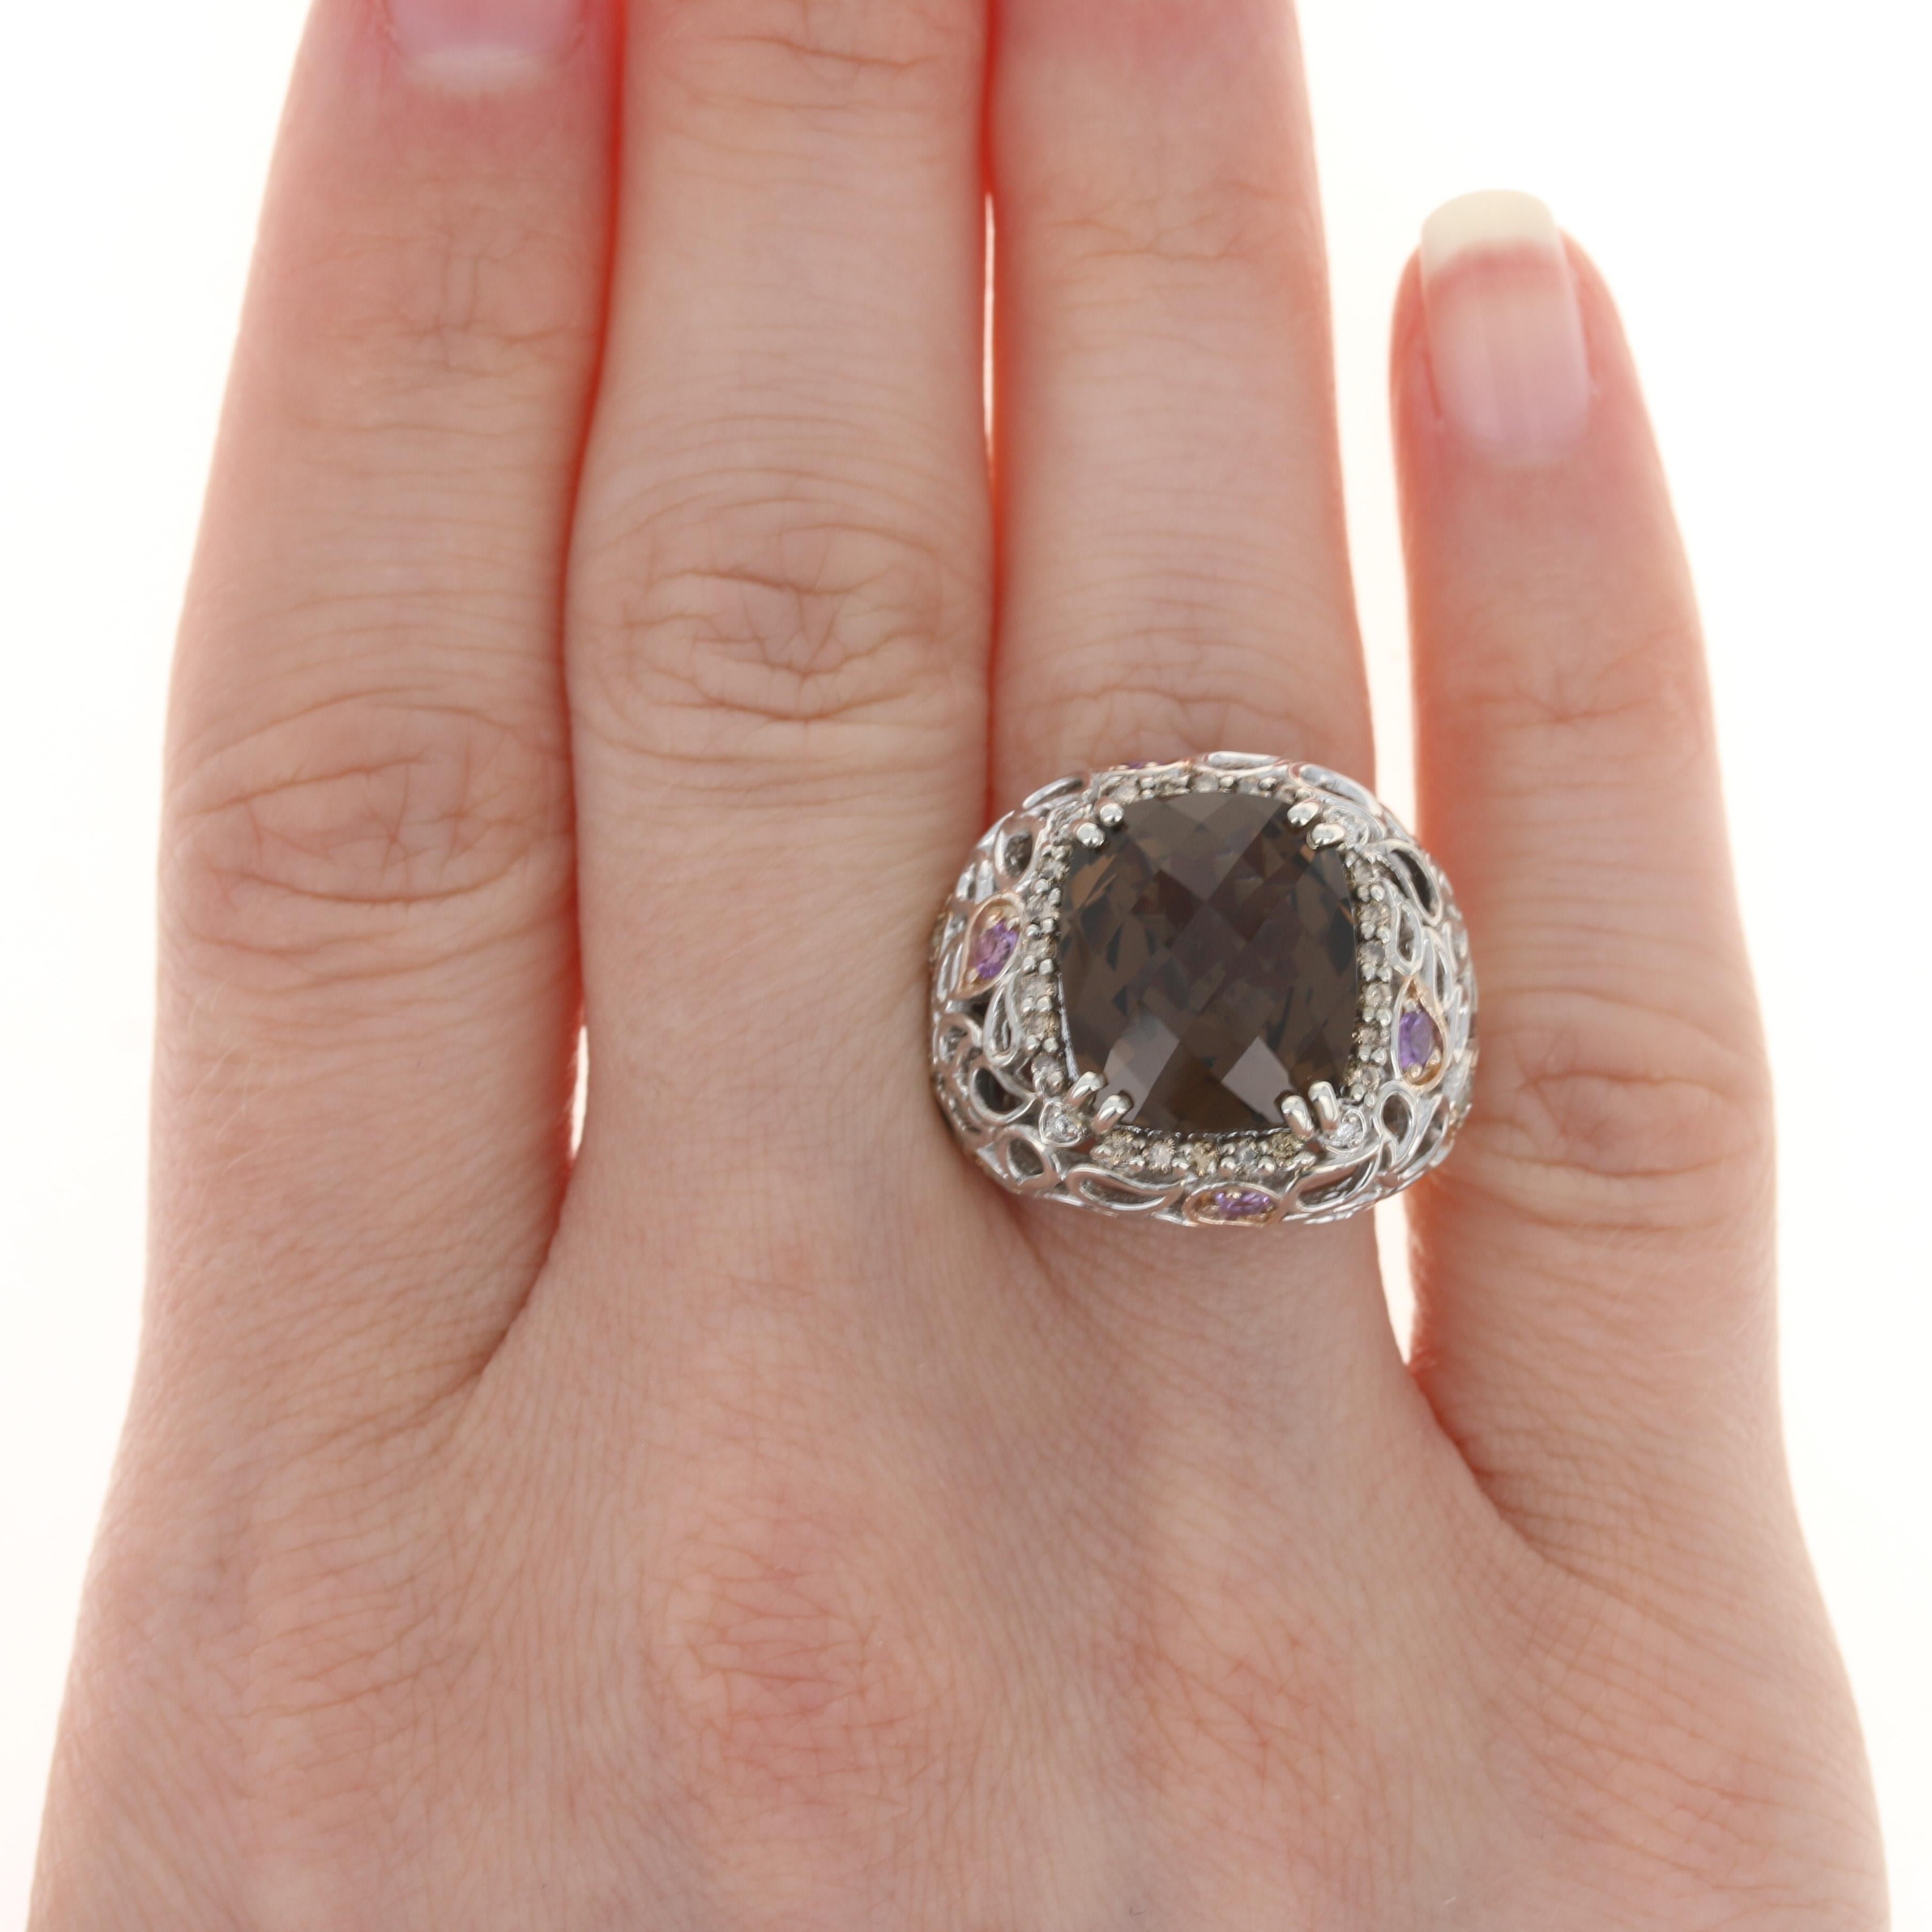 Size: 6 3/4
Sizing Fee: Up to 1/2 a size for $30  

Brand: Le Vian

Metal Content: Sterling Silver (rose gold plated)

Stone Information: 
Genuine Smoky Quartz
Cut: Cushion Checkerboard 
Color: Brown
Size: 14.2mm x 12.1mm

Genuine Amethysts &